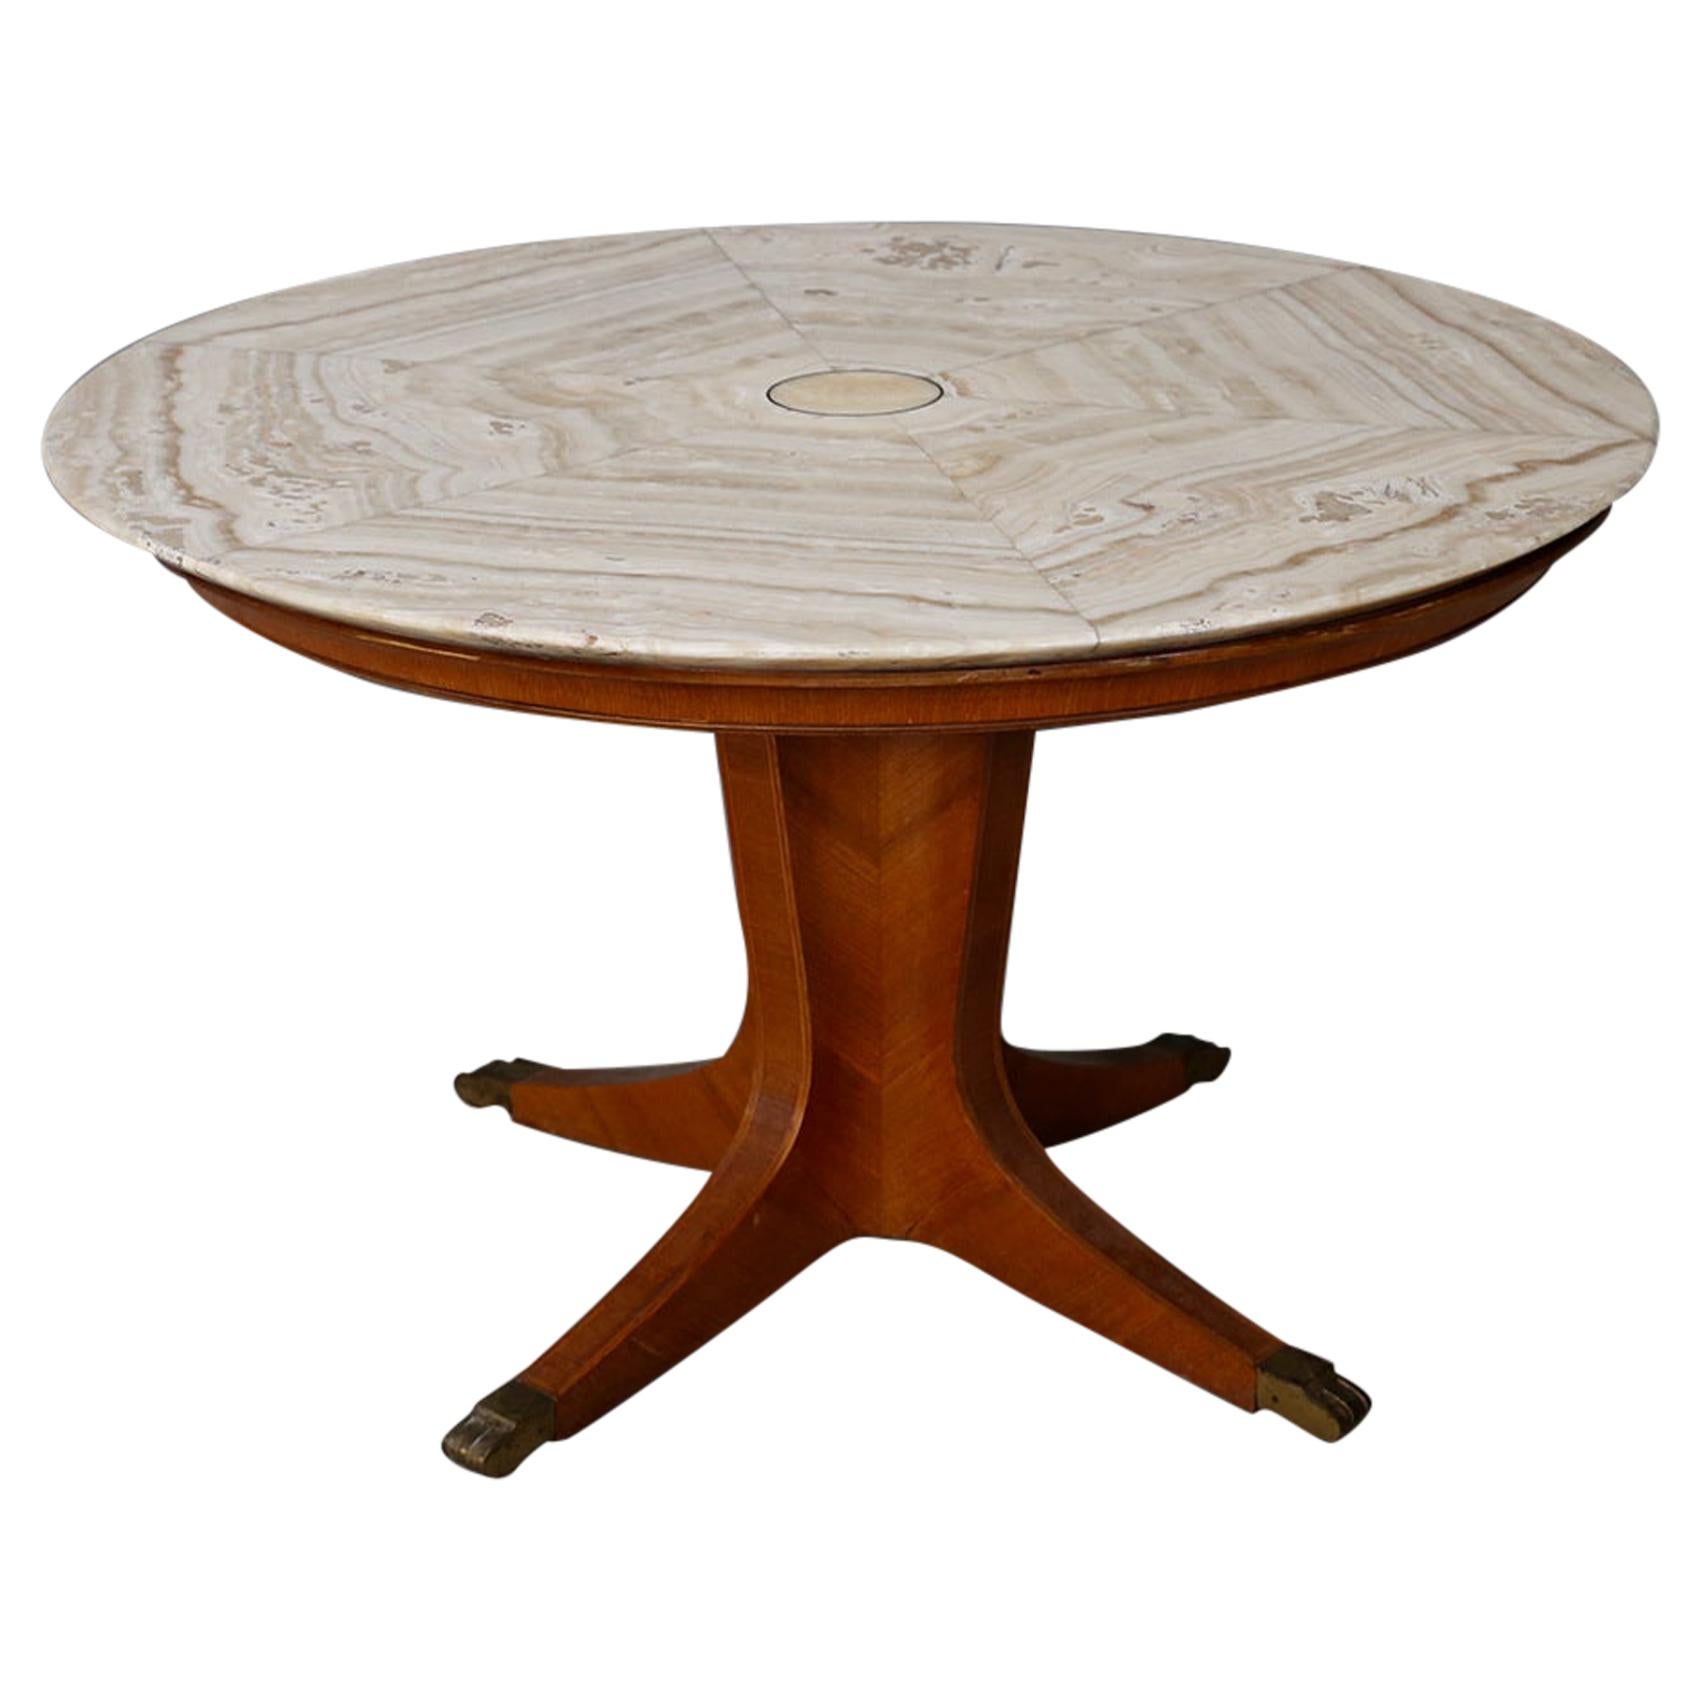 Paolo Buffa Midcentury Table Round Onyx and Wood, 1950s